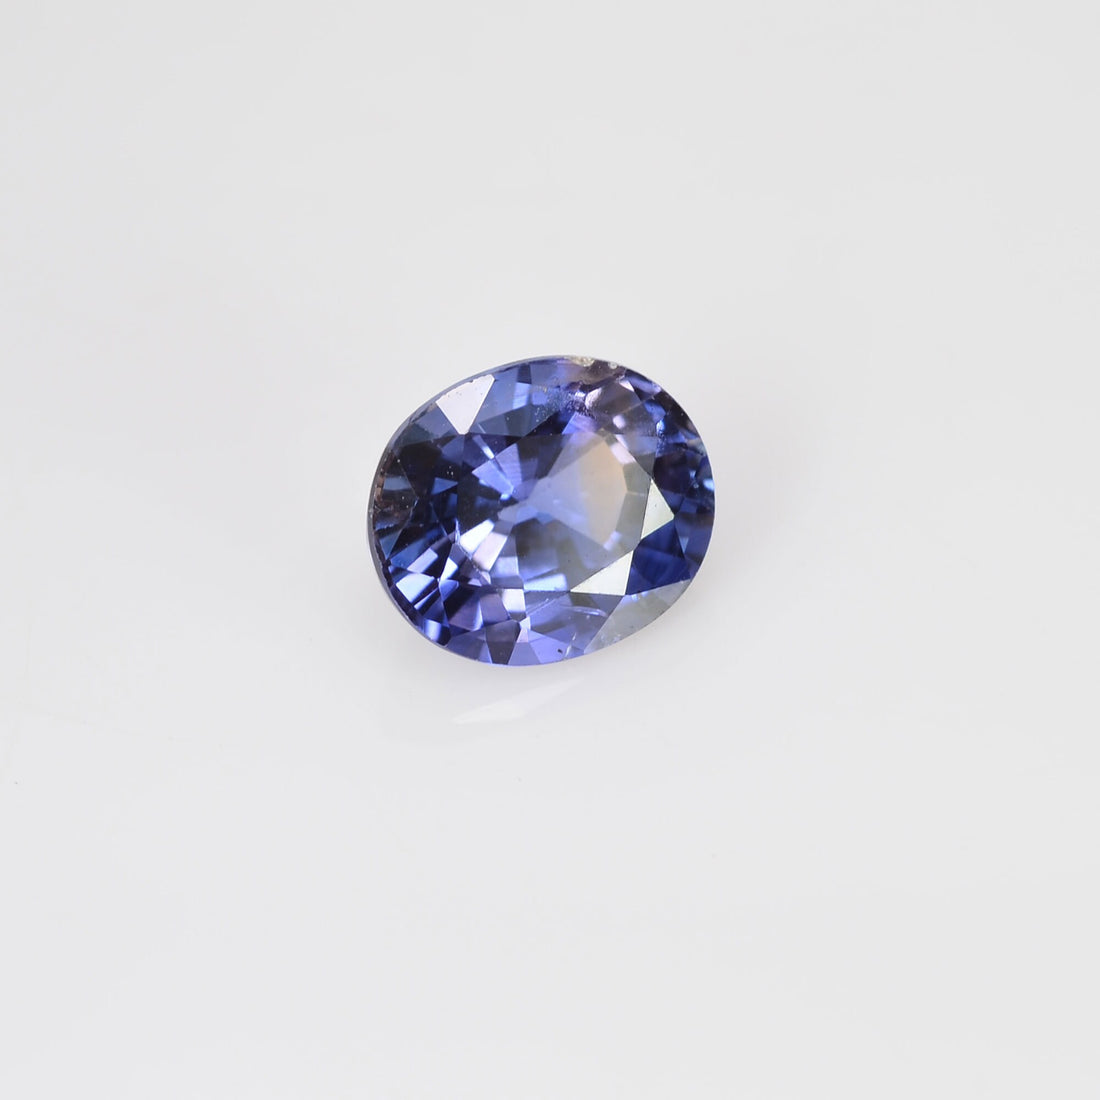 1.53 cts Natural Fancy Blue Sapphire Loose Gemstone Oval Cut